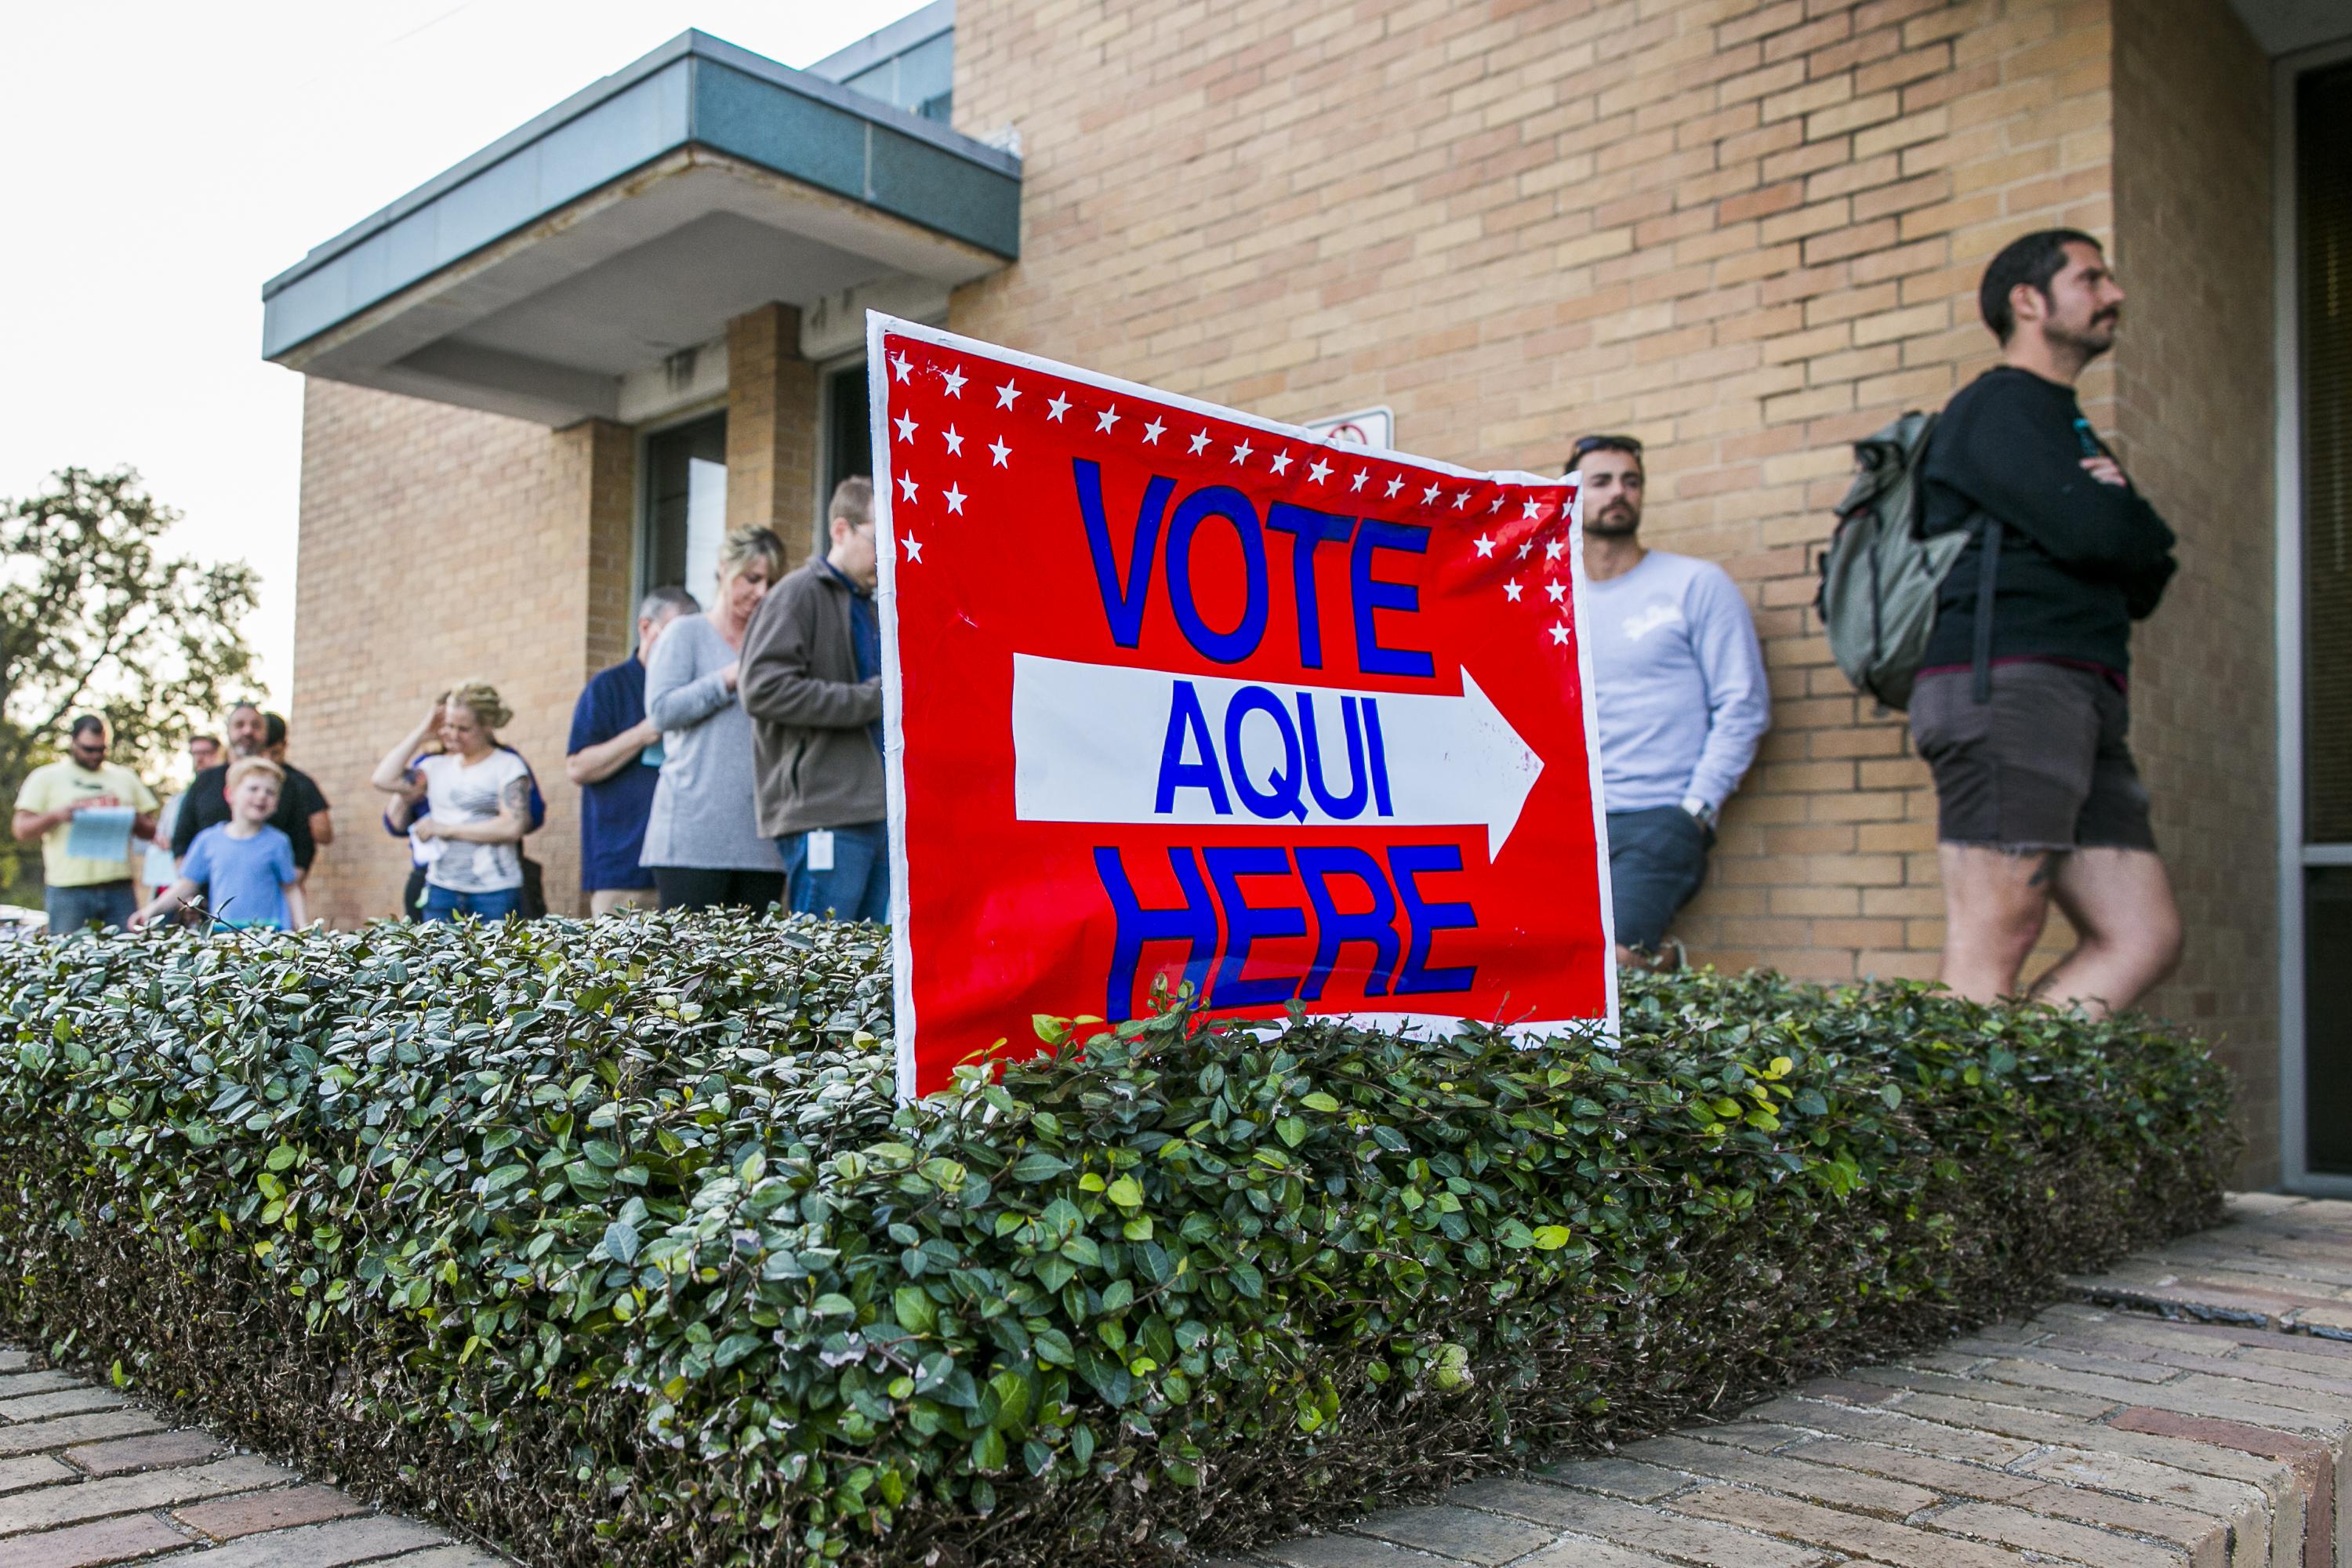 AUSTIN, TX - MARCH 06: A line of early voters wait outside the Gardner Betts Annex on March 6, 2018 in Austin, Texas. Democrats are seeing a large increase in voter turnourt compared to last year. (Photo by Drew Anthony Smith/Getty Images)